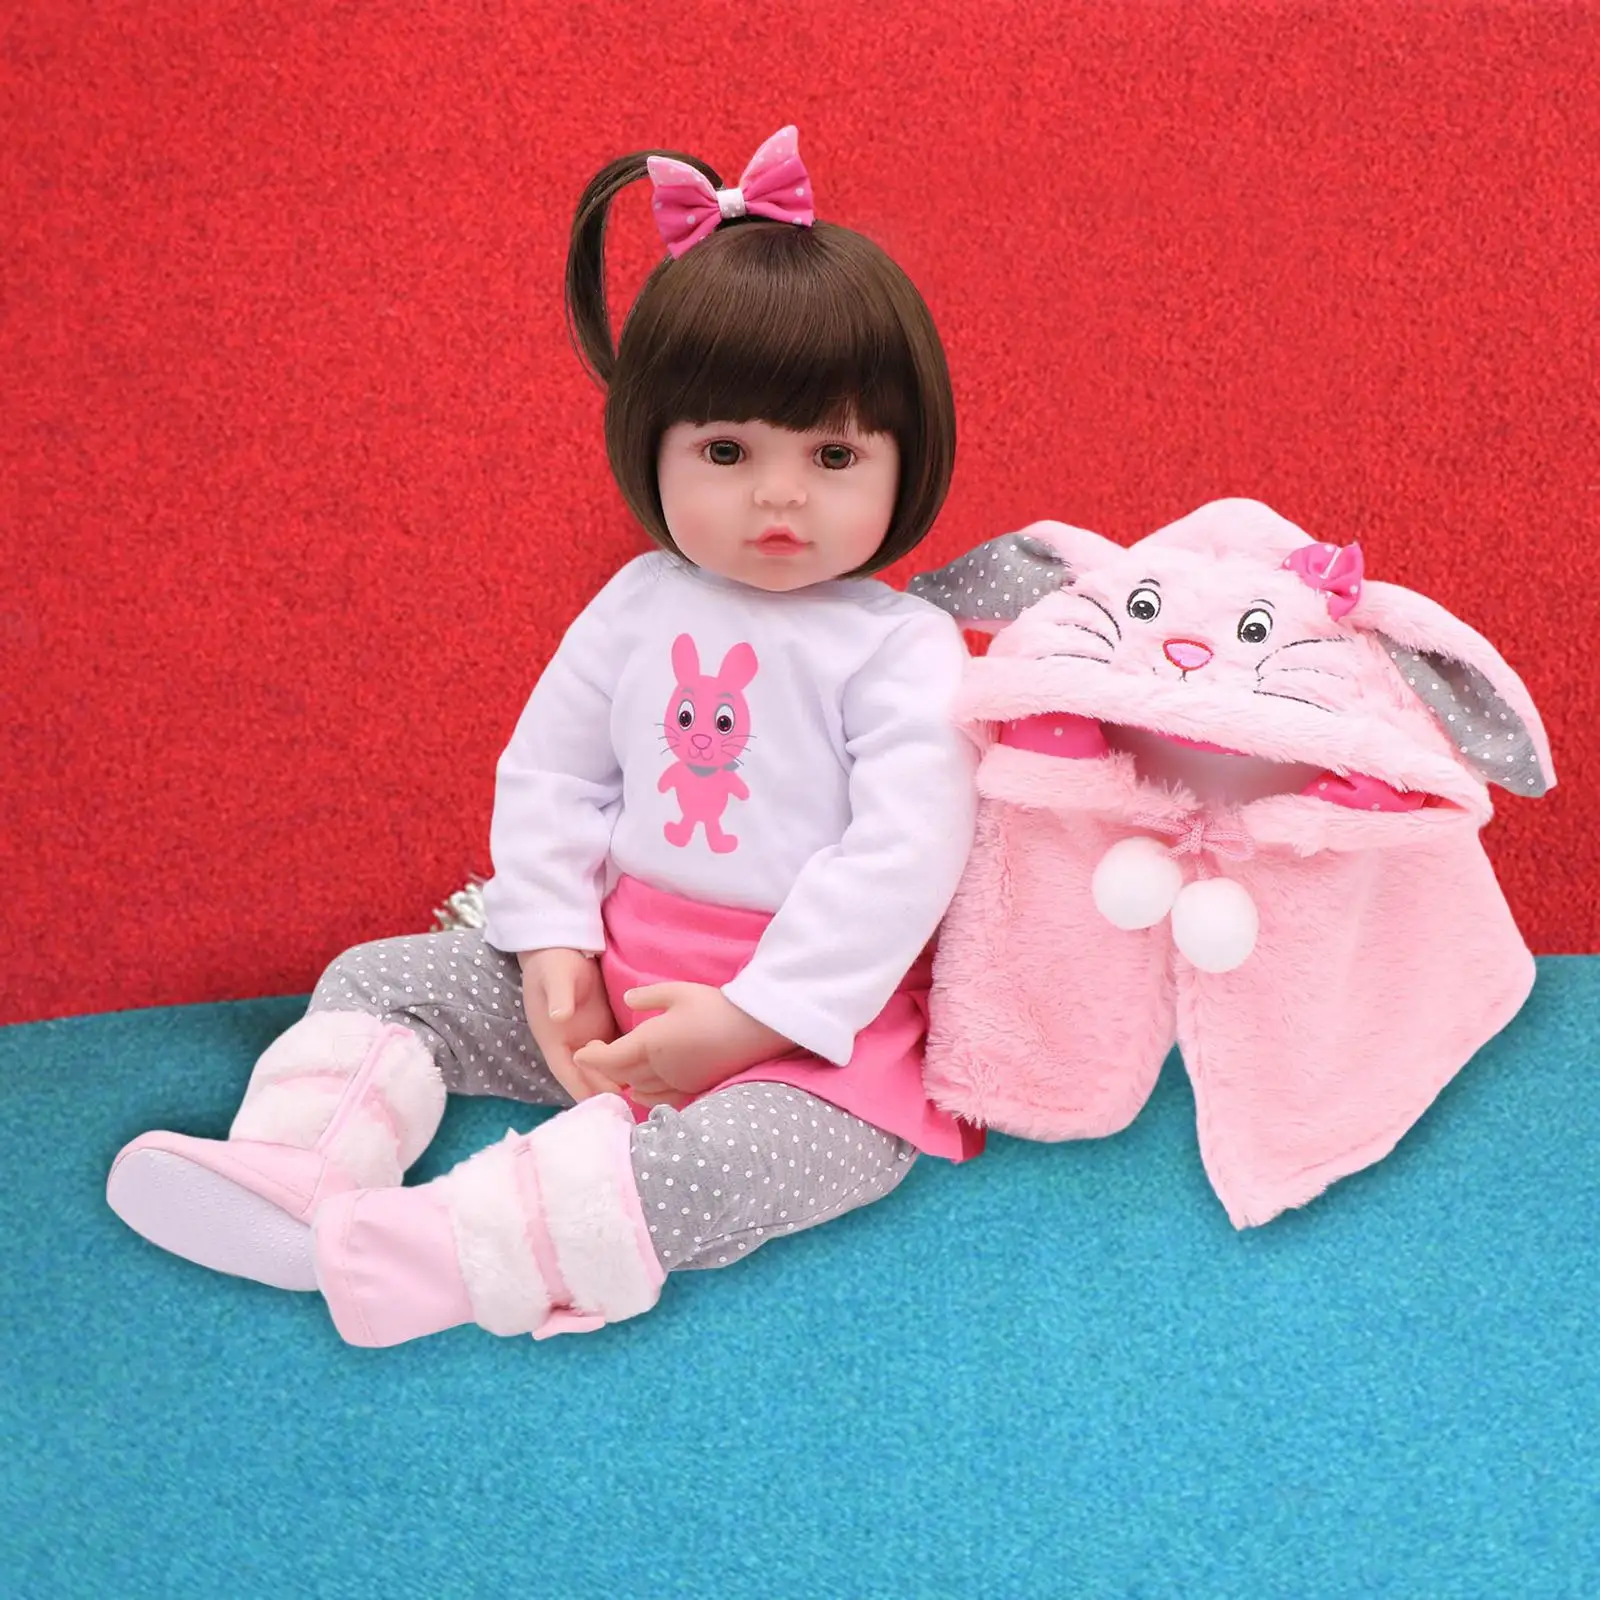 19 inch Baby Doll Lifelike with Movable Jointed Full Silicone Vinyl Body for Kids Preschool Role Playing